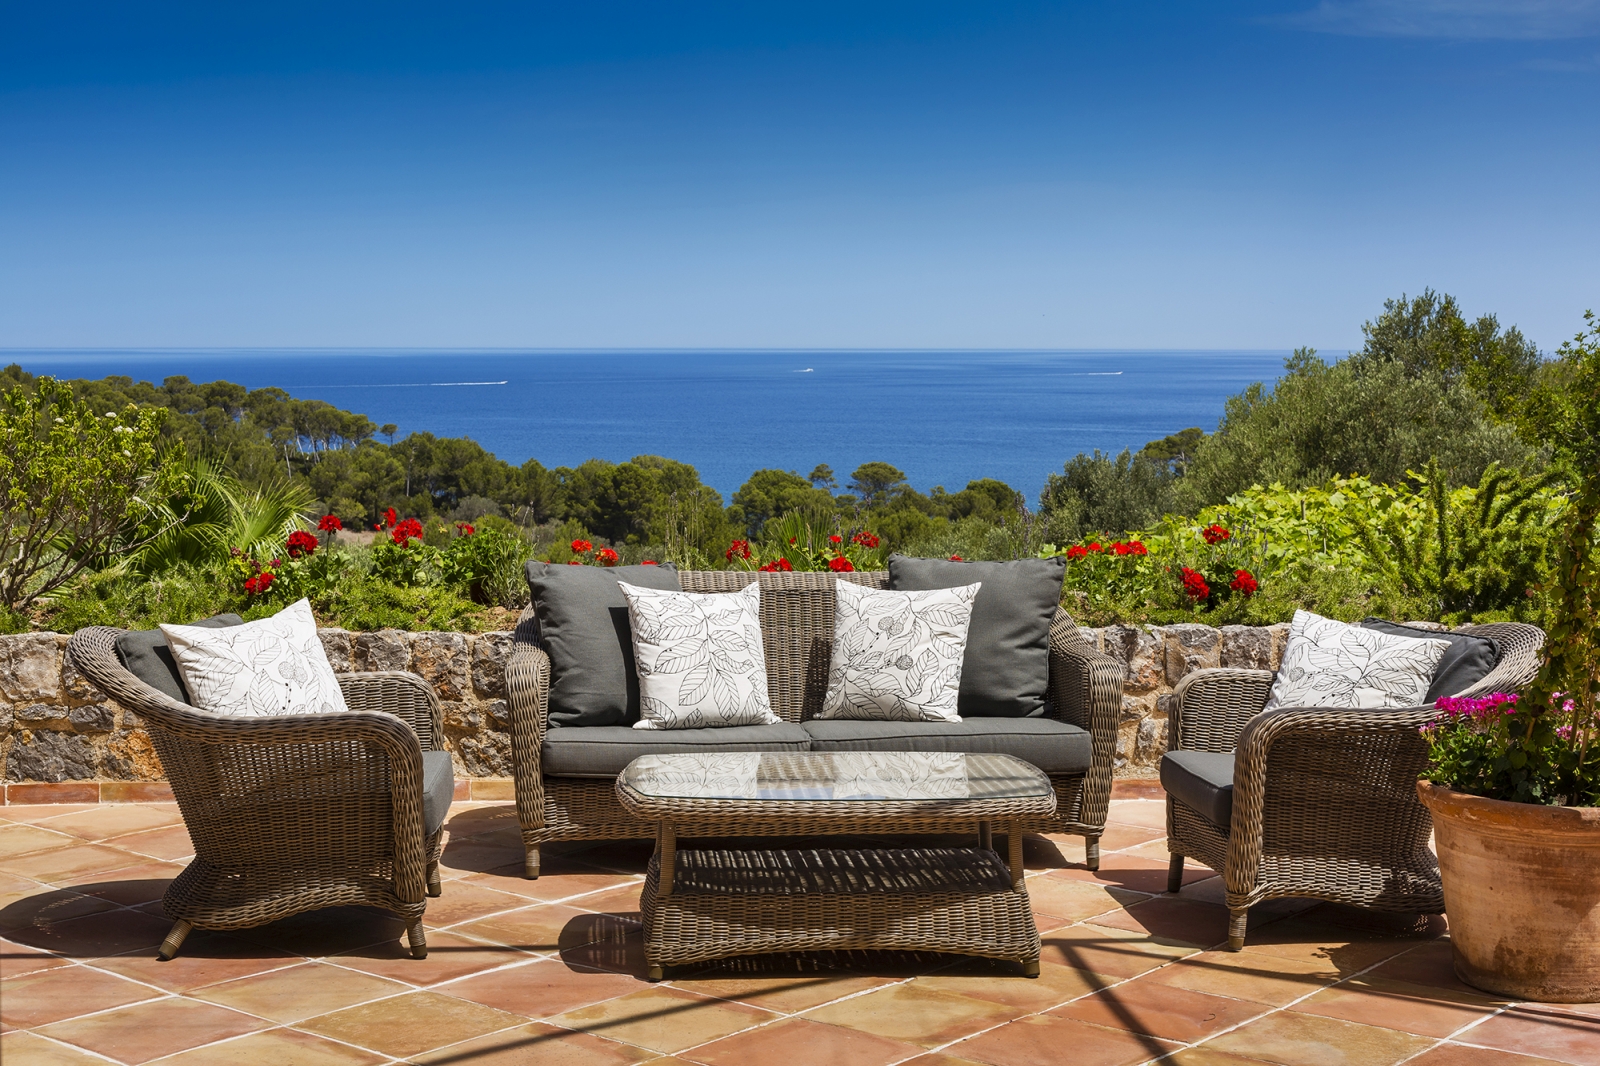 Terrace seating area with views over the surrounding area and the Mediterranean Sea